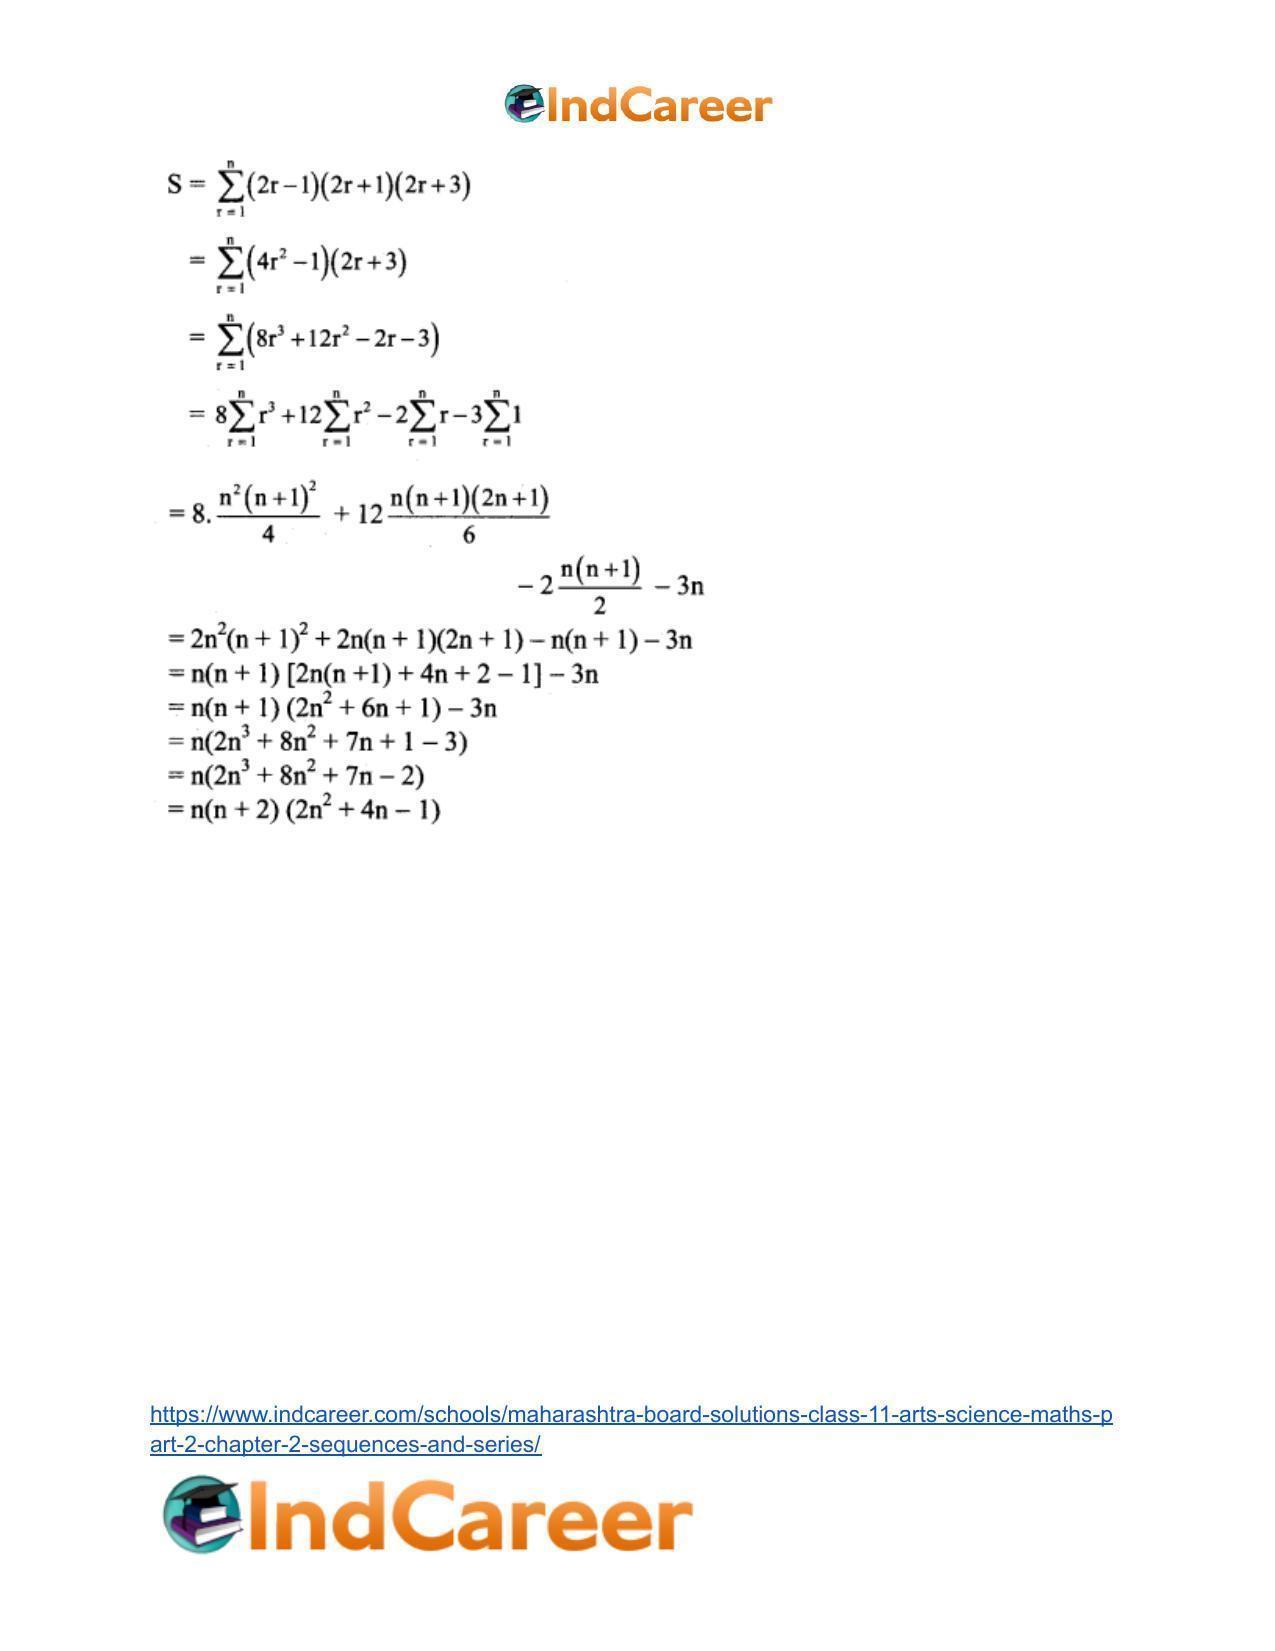 Maharashtra Board Solutions Class 11-Arts & Science Maths (Part 2): Chapter 2- Sequences and Series - Page 74